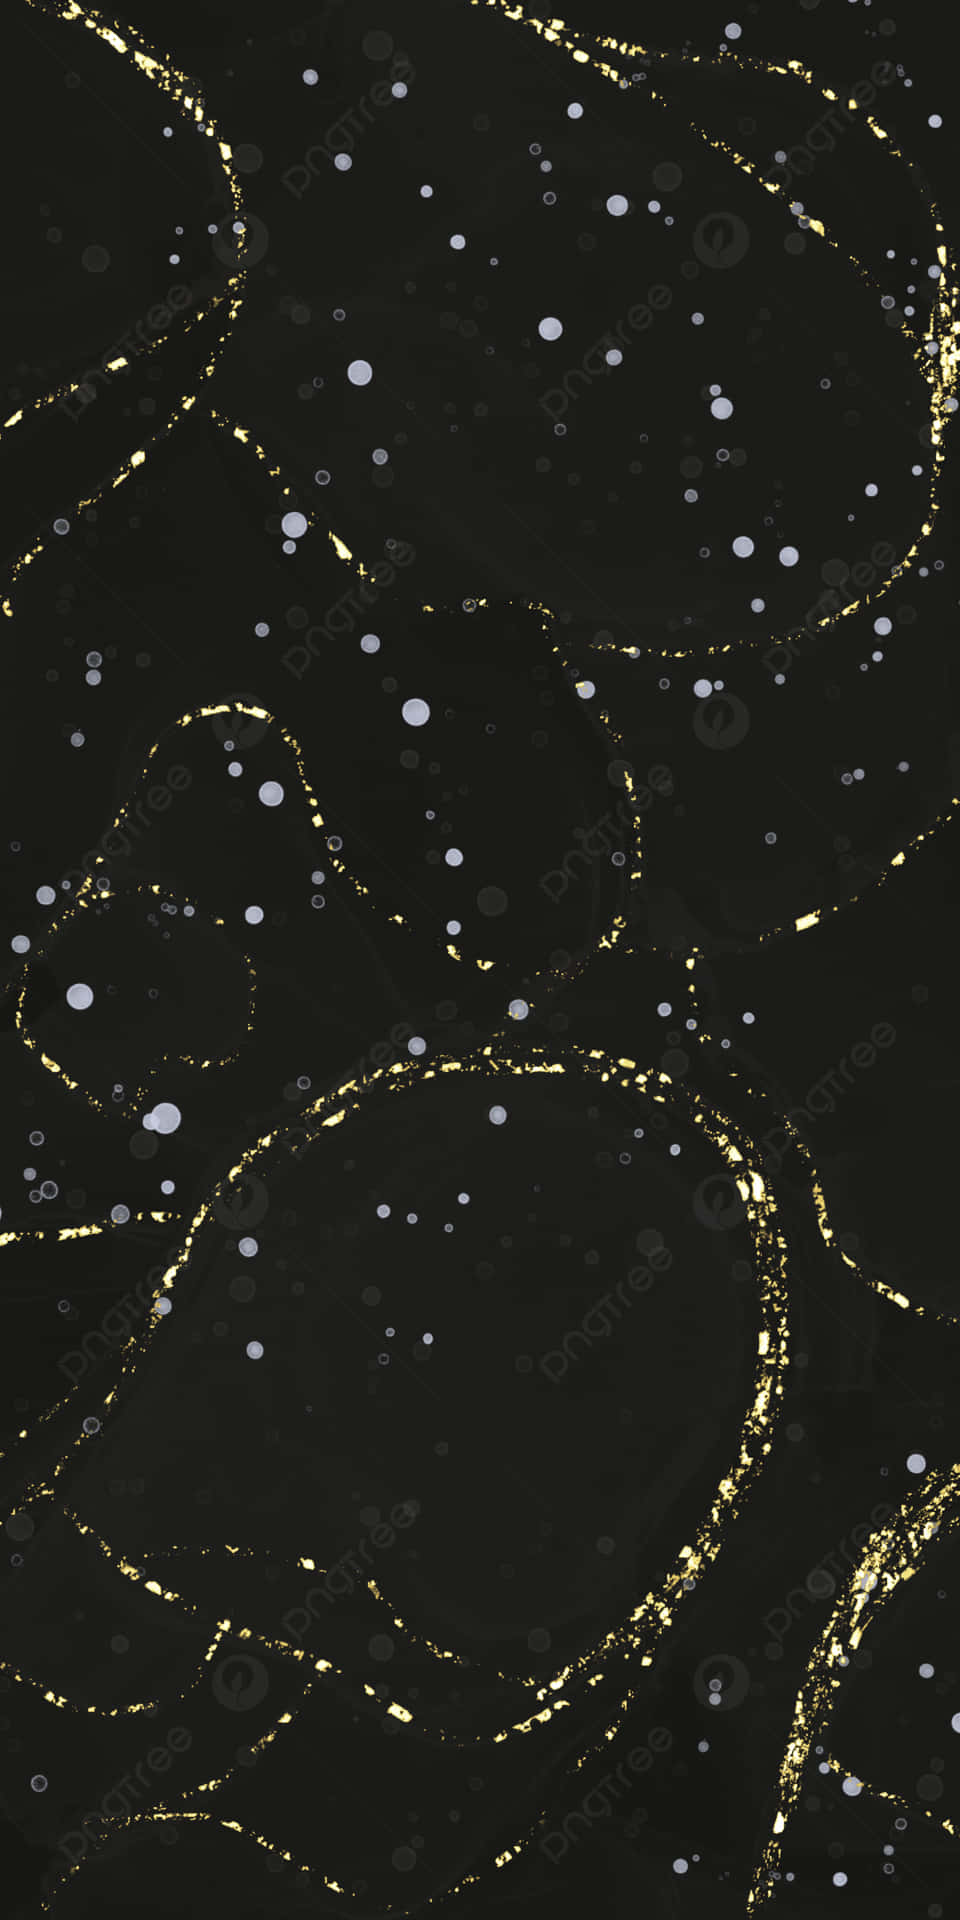 An eye-catching, minimalistic design with a black and gold aesthetic. Wallpaper